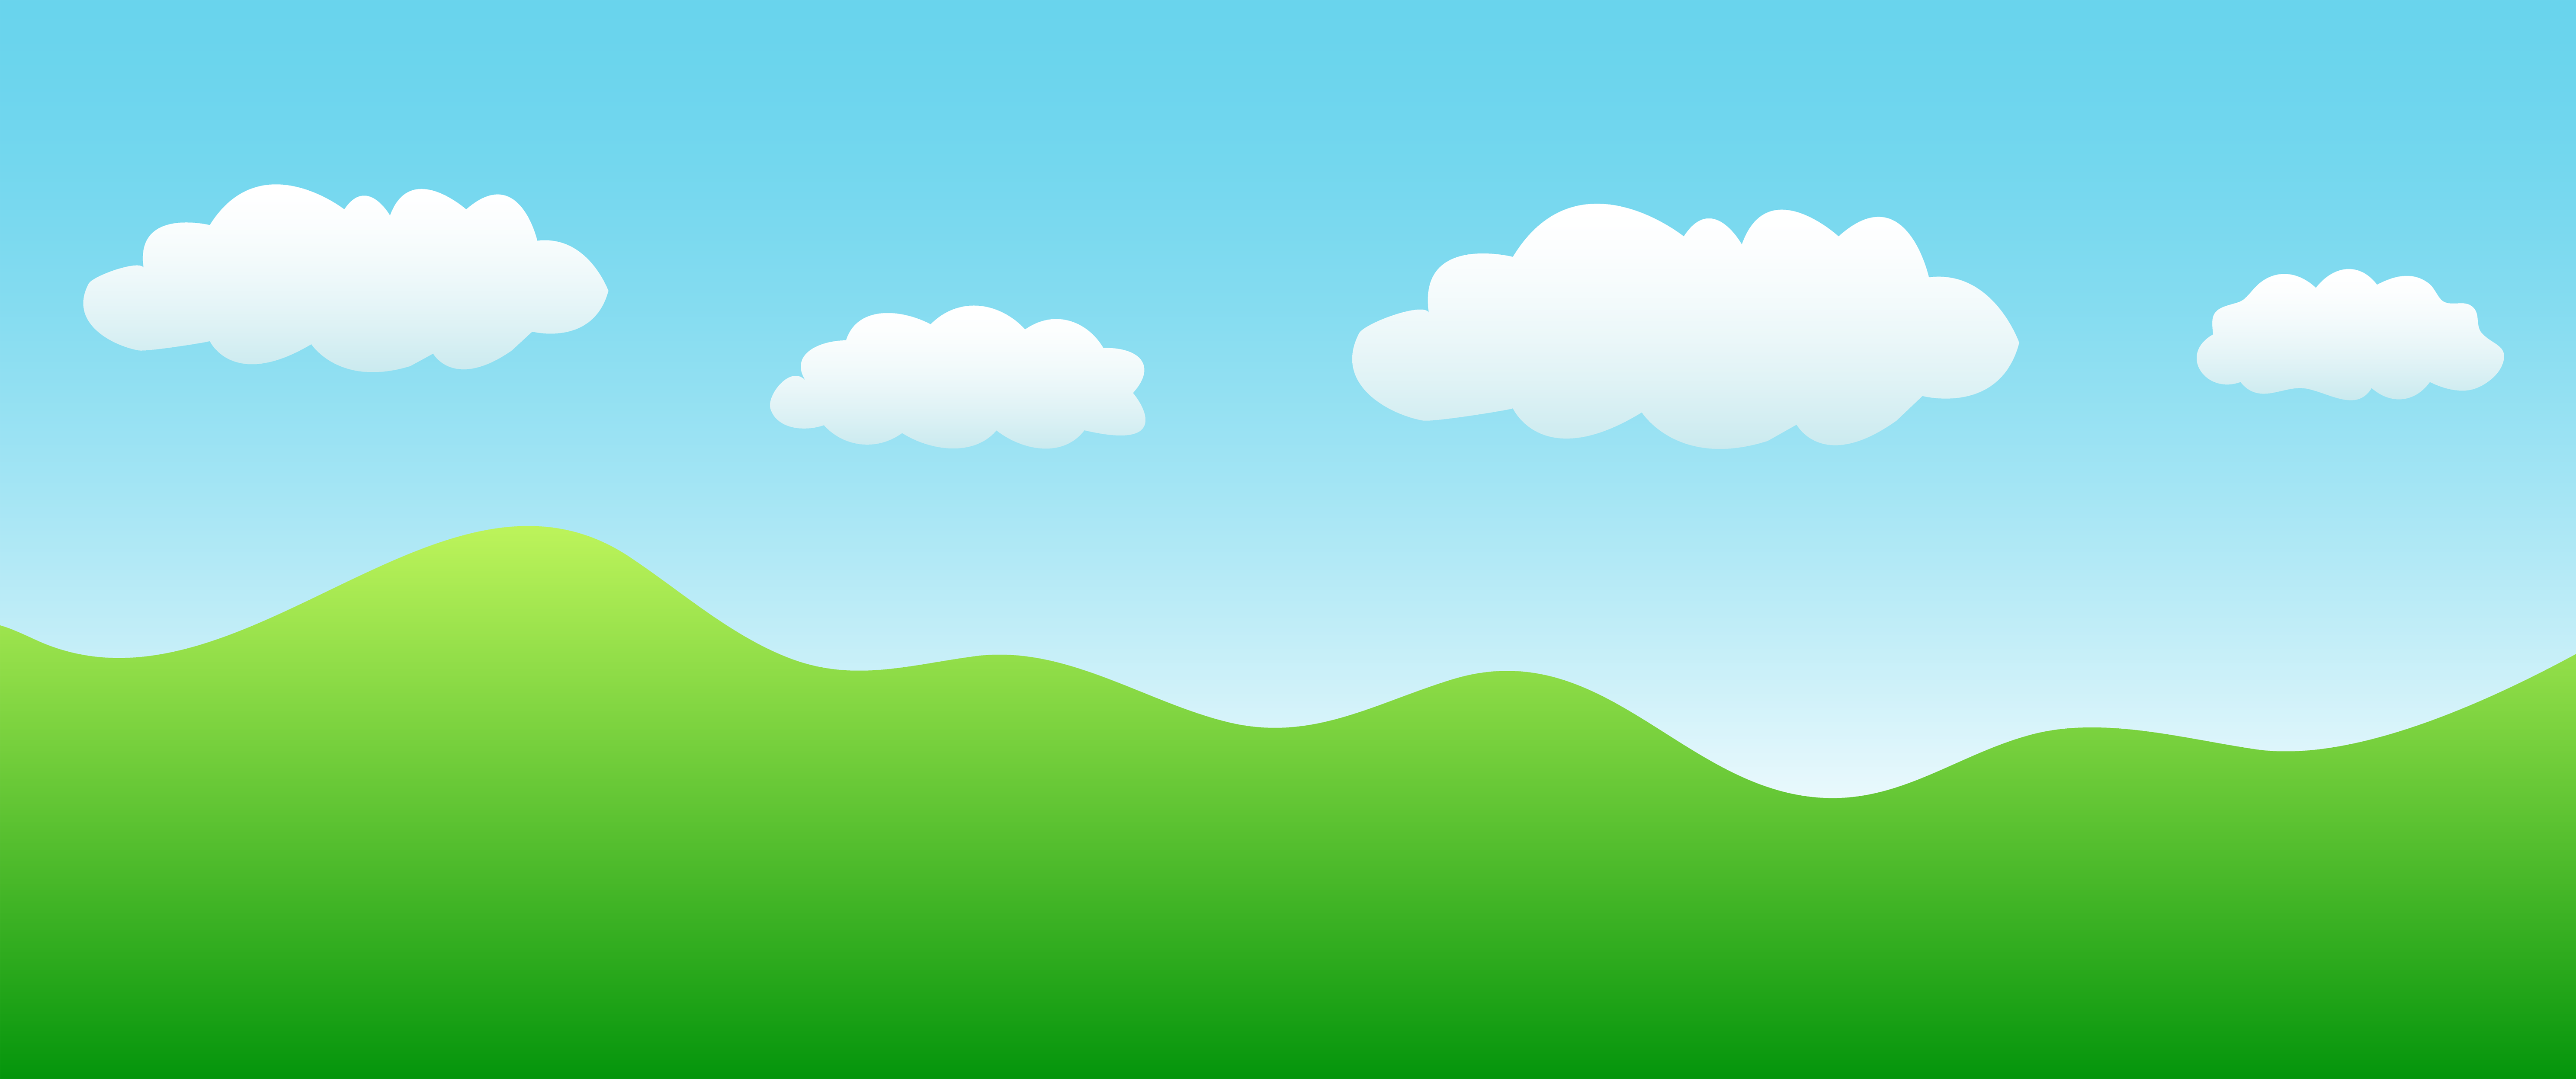 Simple Landscape With Hills And Sky   Free Clip Art